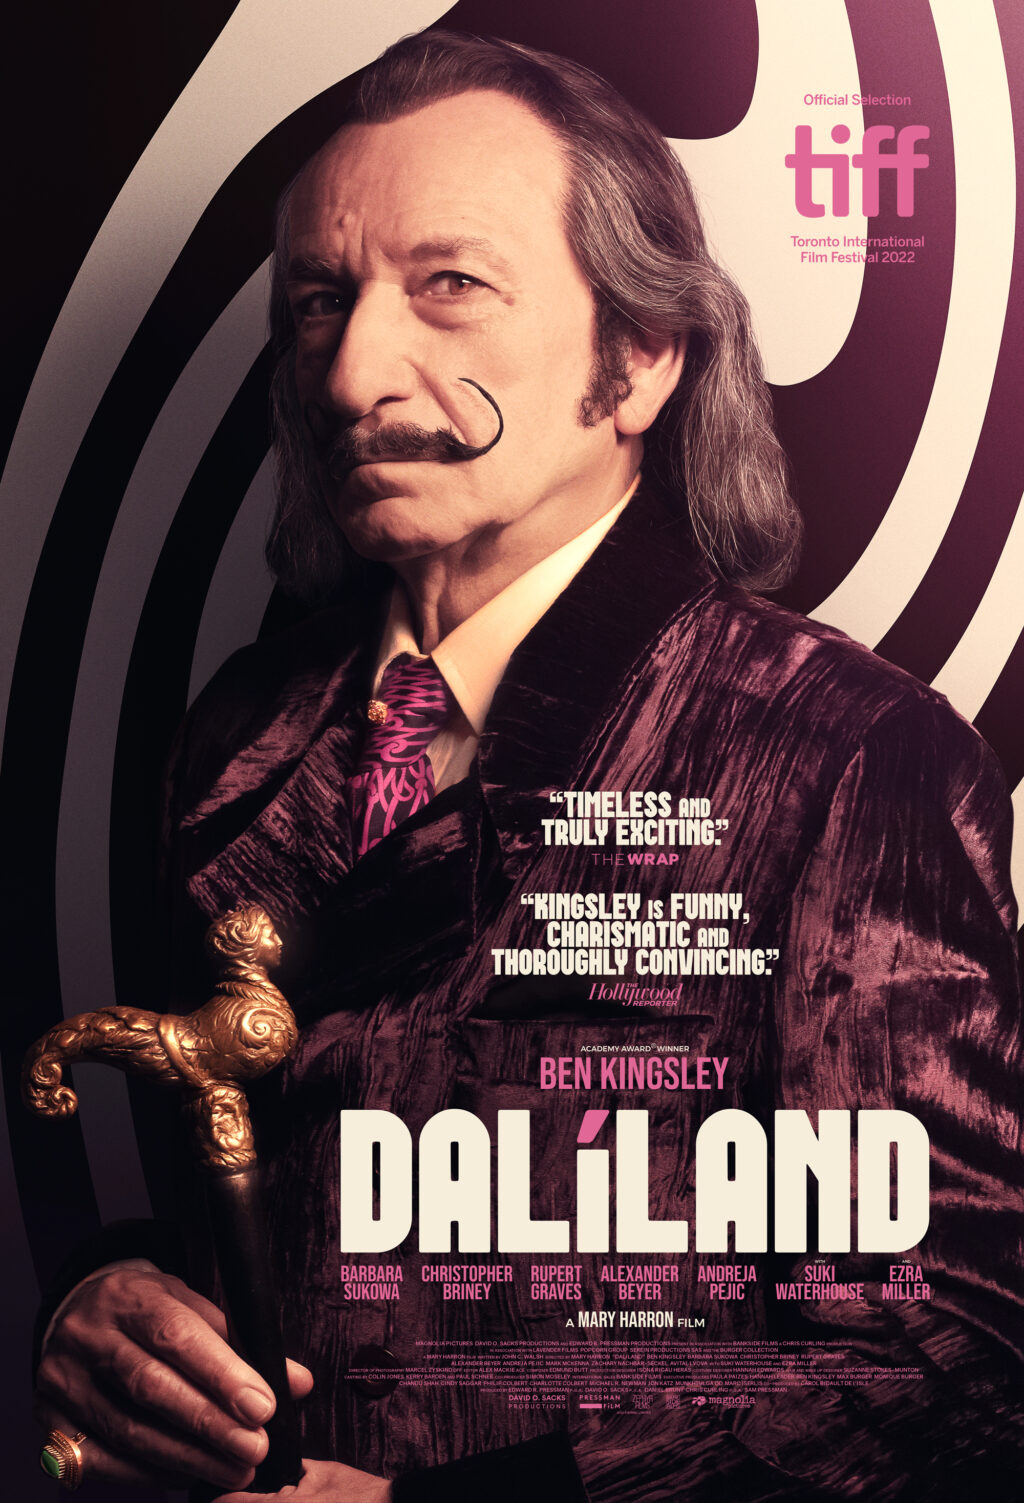 This month’s movie and TV reviews of The Daliland and The Lost King.